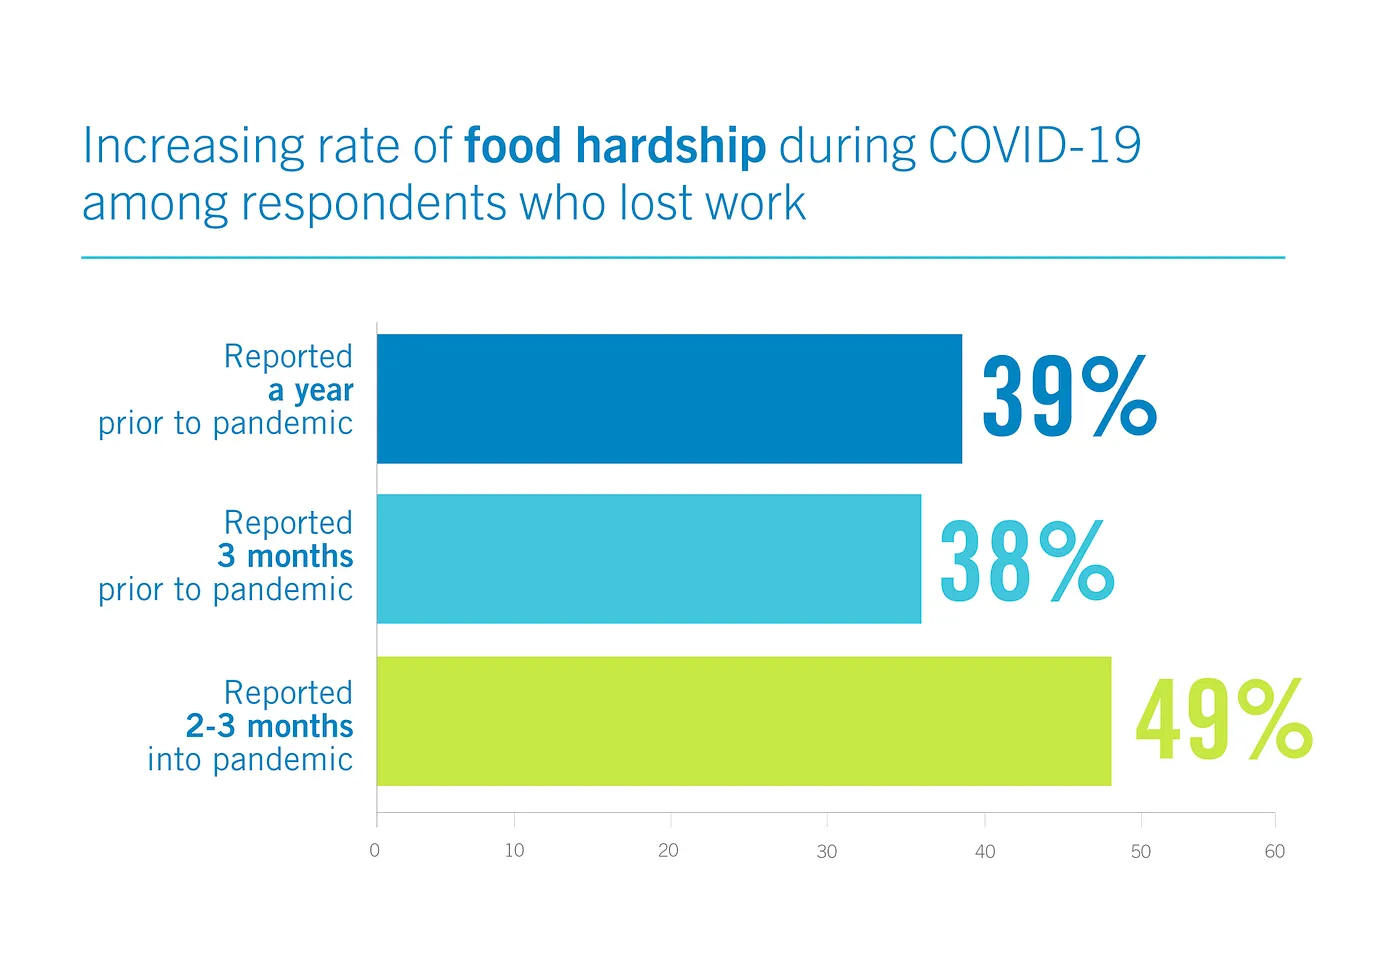 A graph that shows the increasing rate of food hardship during COVID-19